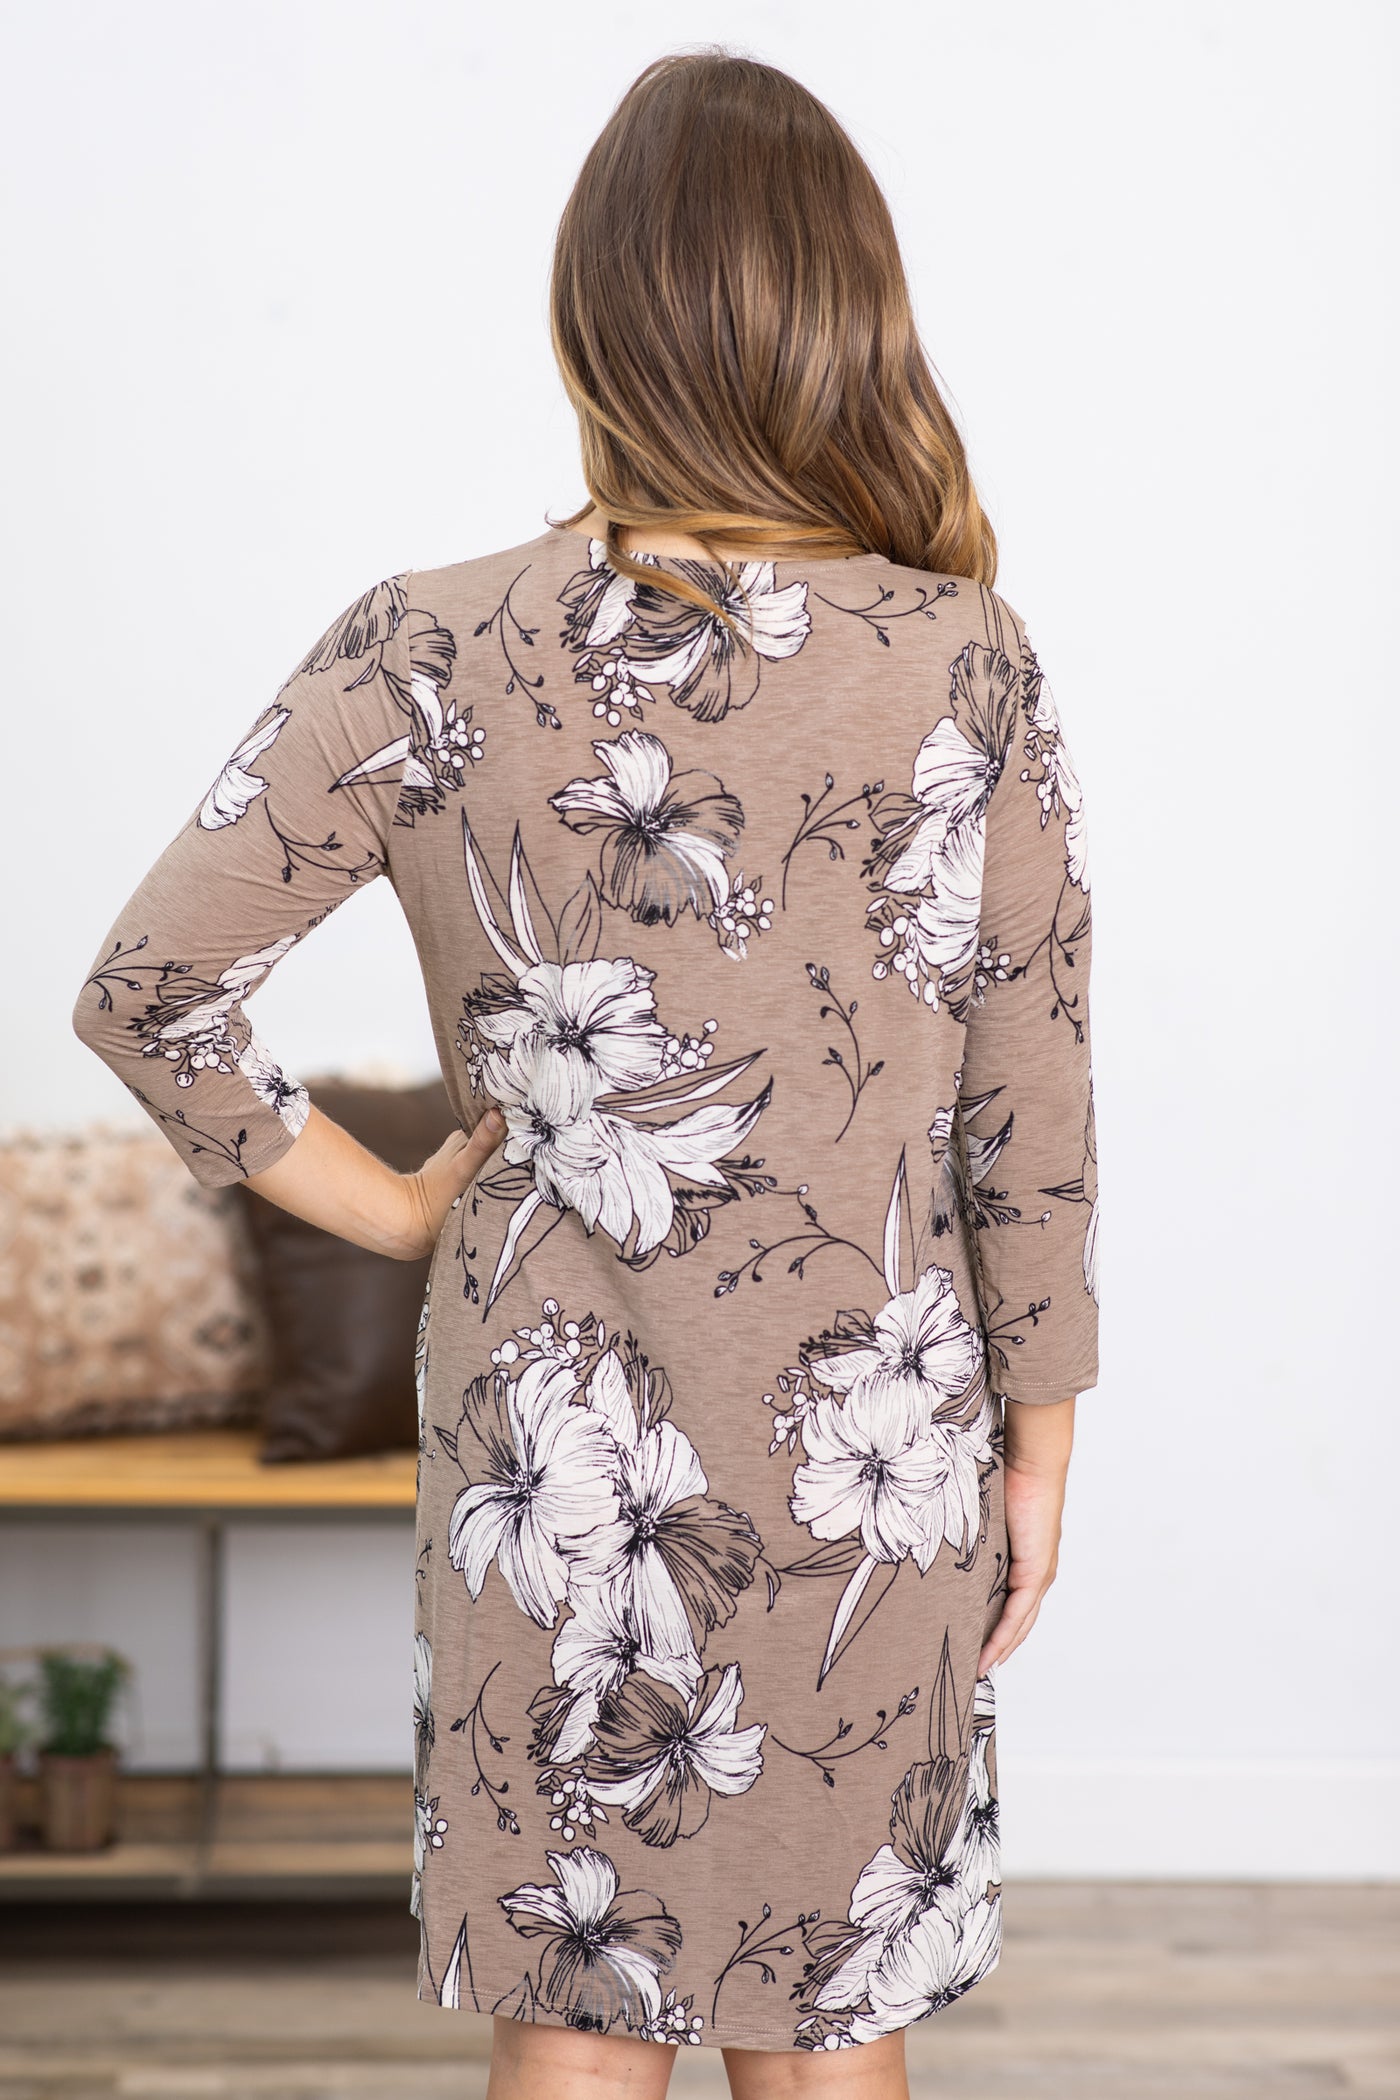 Mocha and Cream Floral Dress With Sleeves